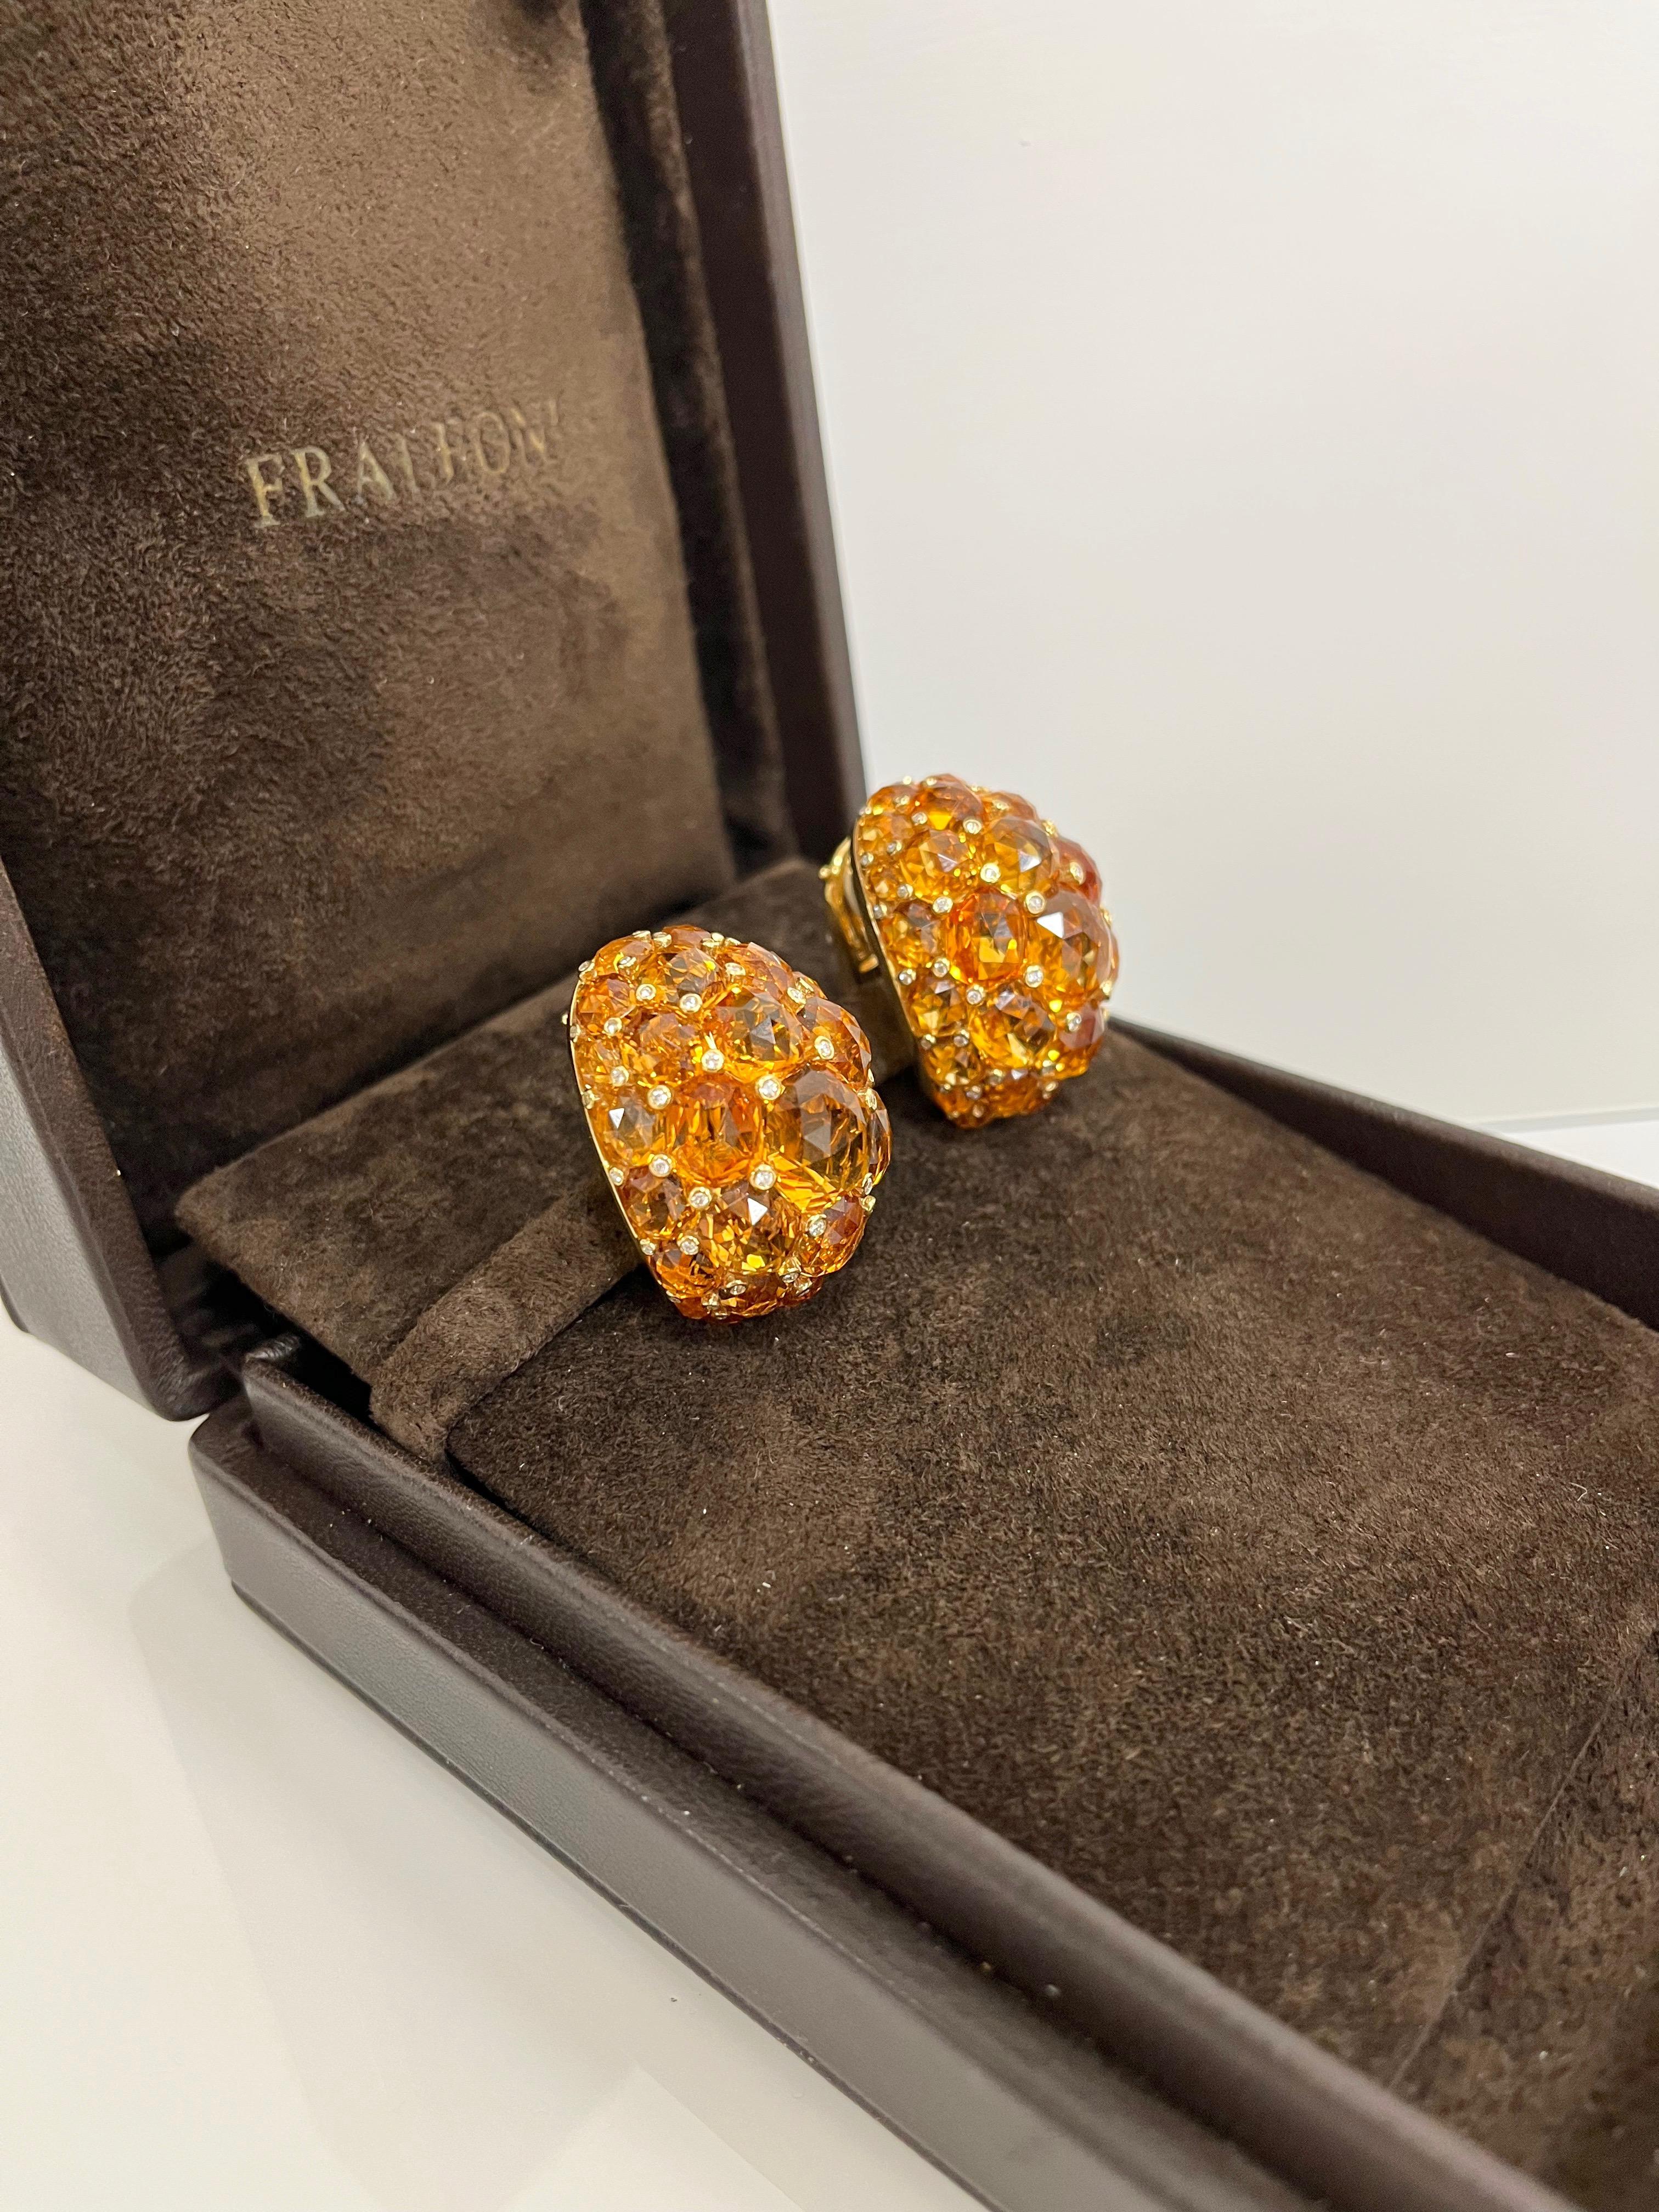 18 kt. yellow gold earrings with round-cut diamonds and multicut critine.
This gorgeous pair of earrings are hand-made in Italy.
The design is very classic and can be worn on any occasion.
1990 ca.

Diamonds: 0.64 carats
Citrine: 98.41